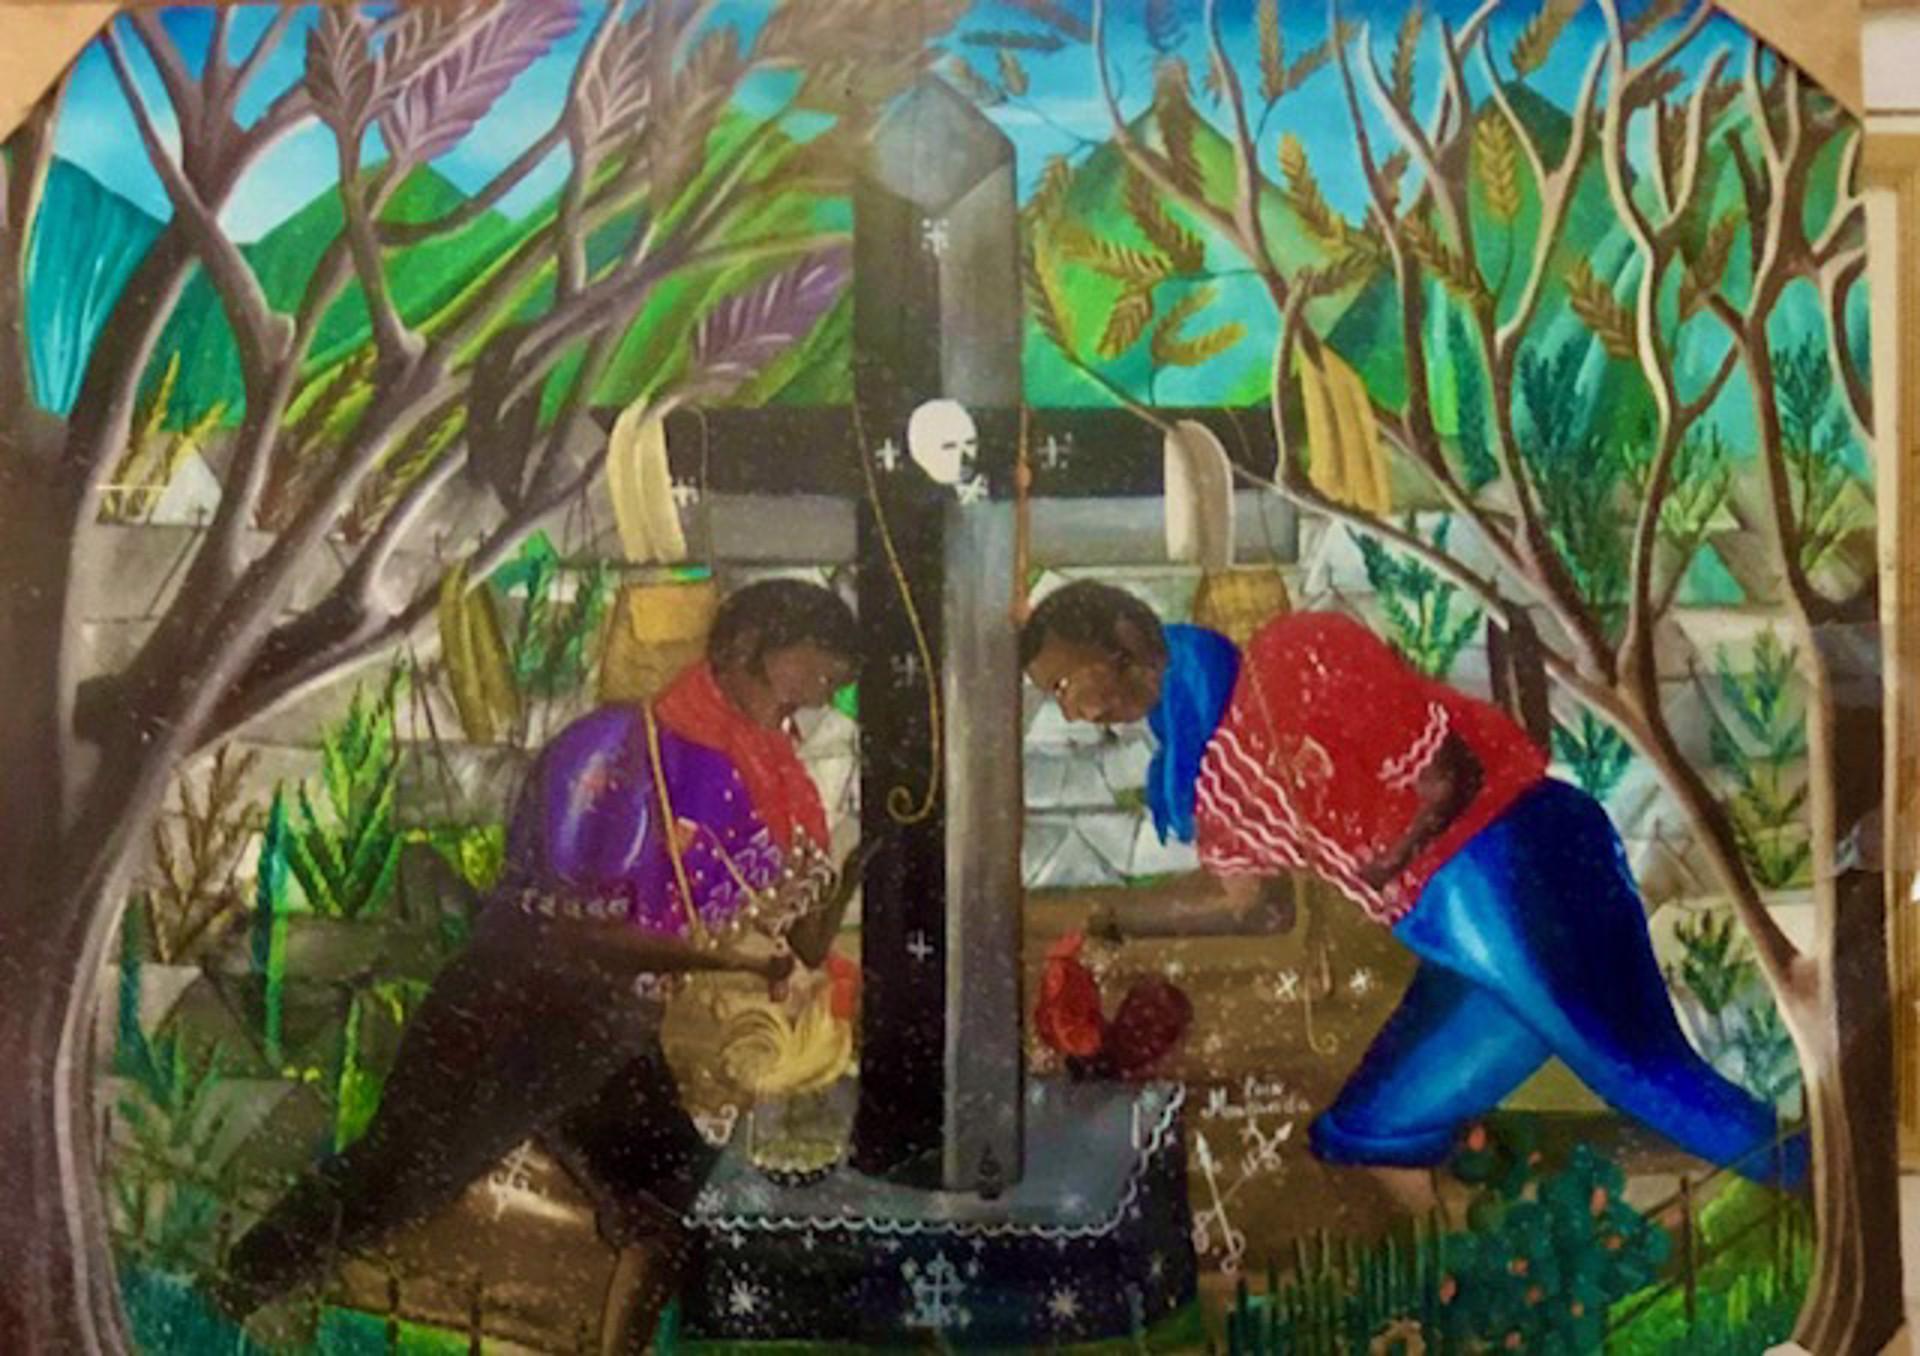 Voodoo Ceremony at Cemetery - Original Haitian Painting - Art by André Pierre